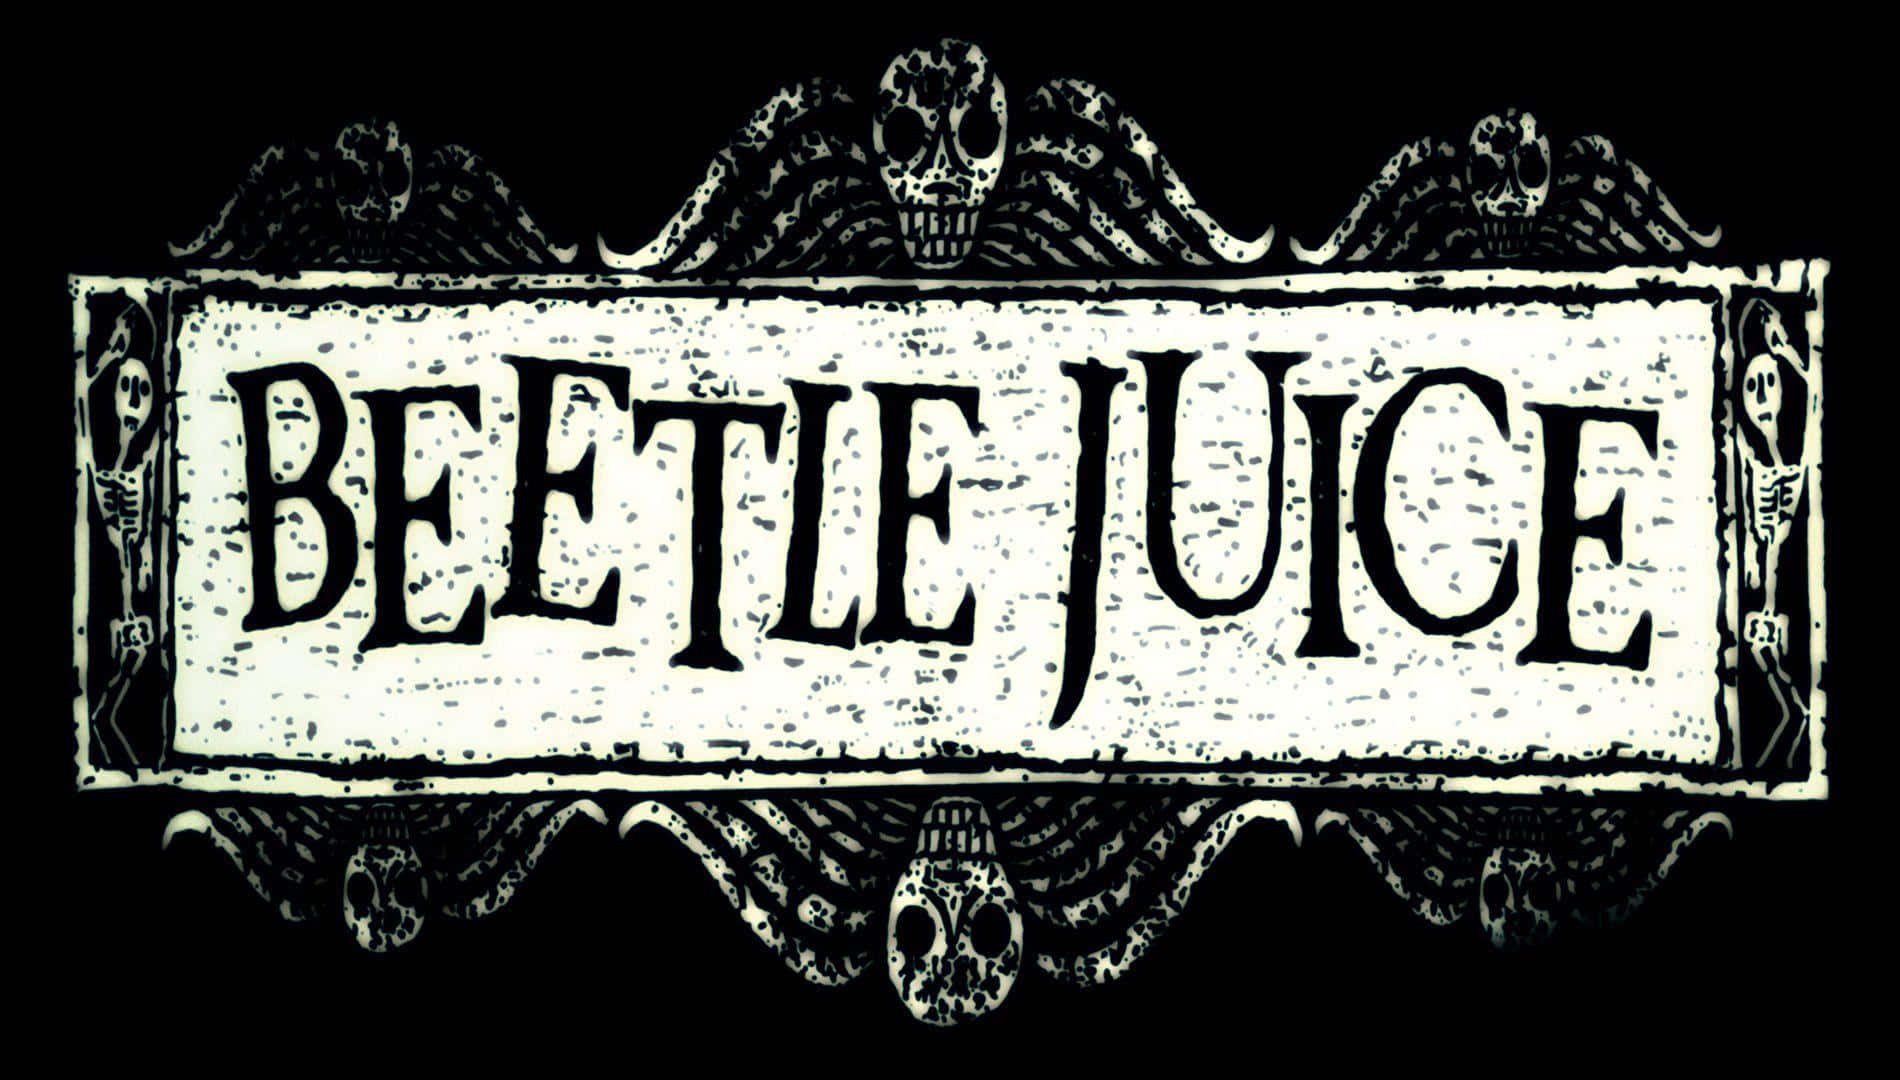 Explore the strange and intriguing world of Beetlejuice.